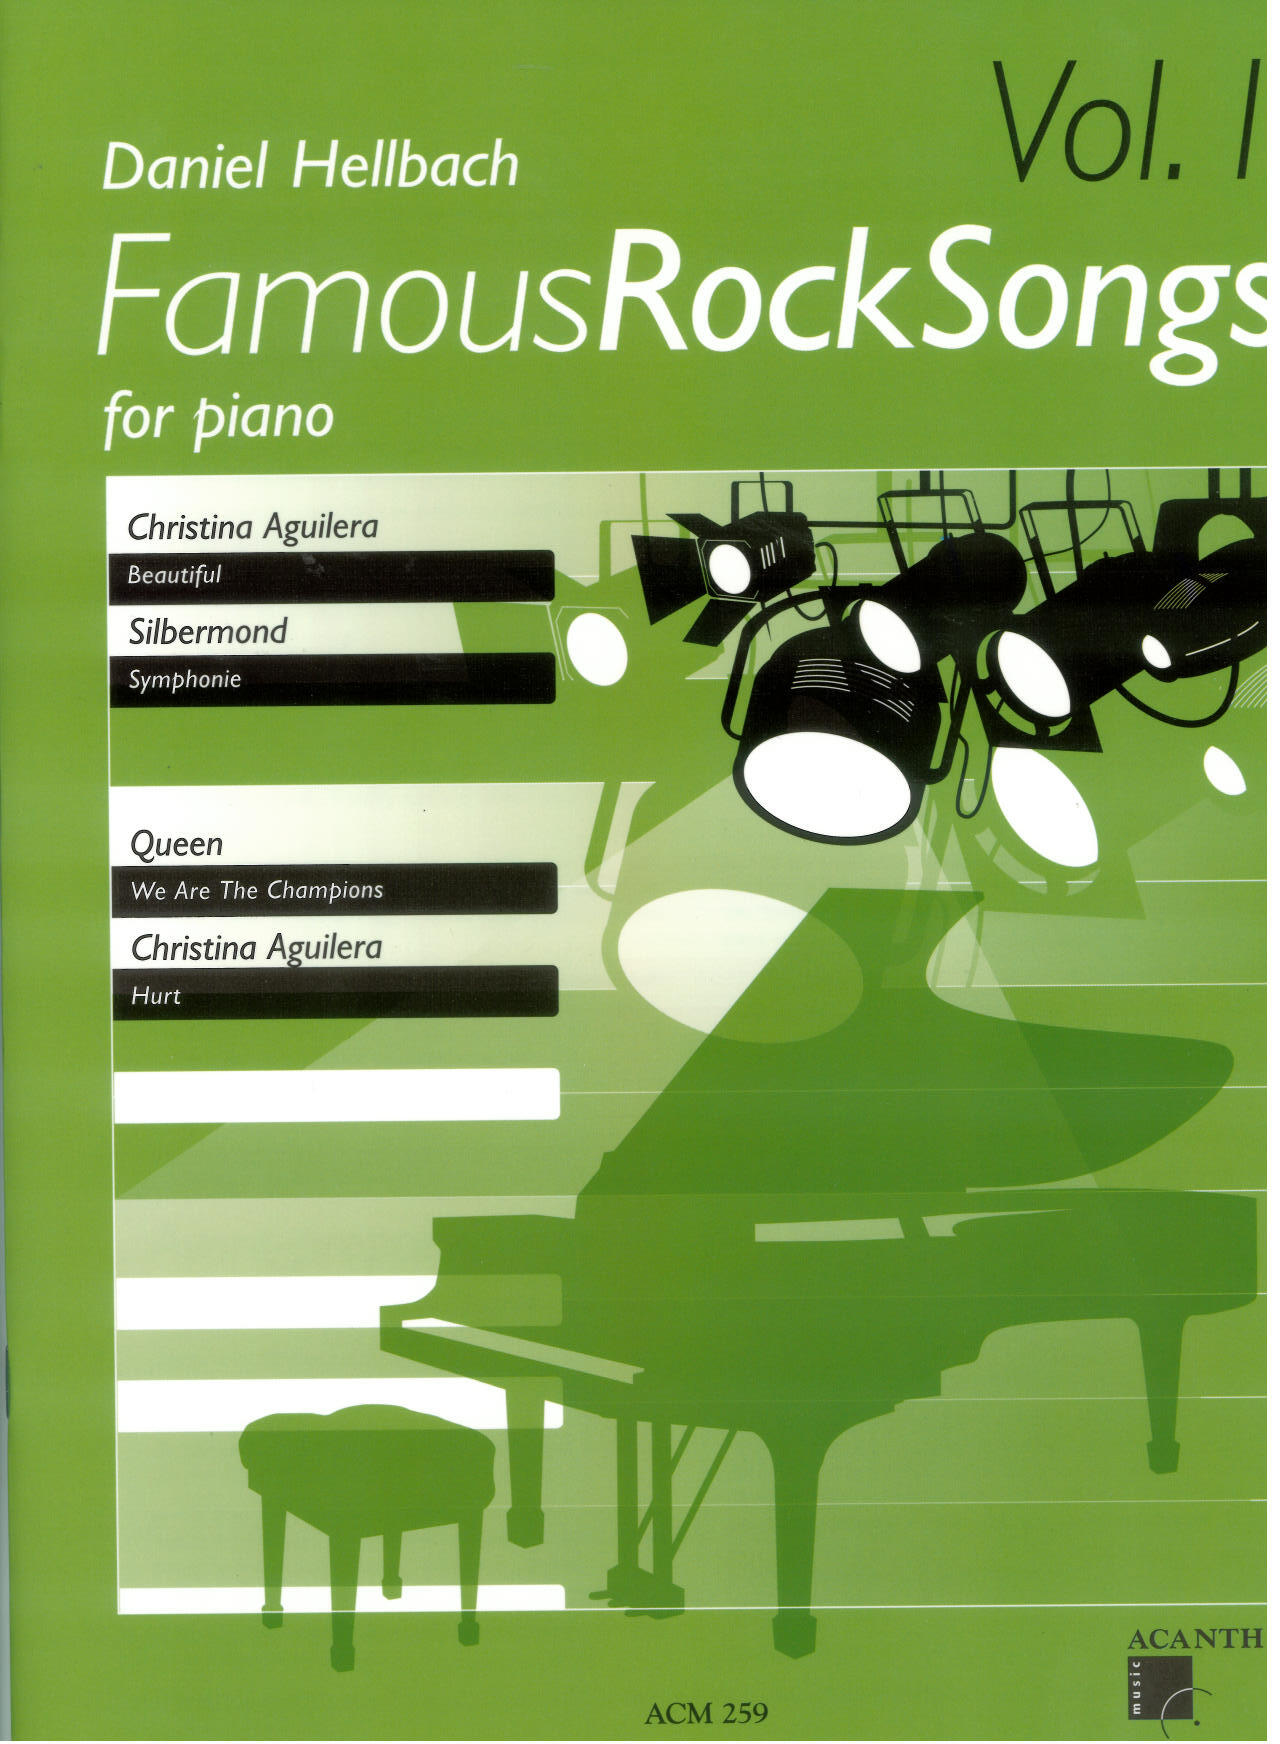 Famous rock songs for piano vol. 1 : photo 1